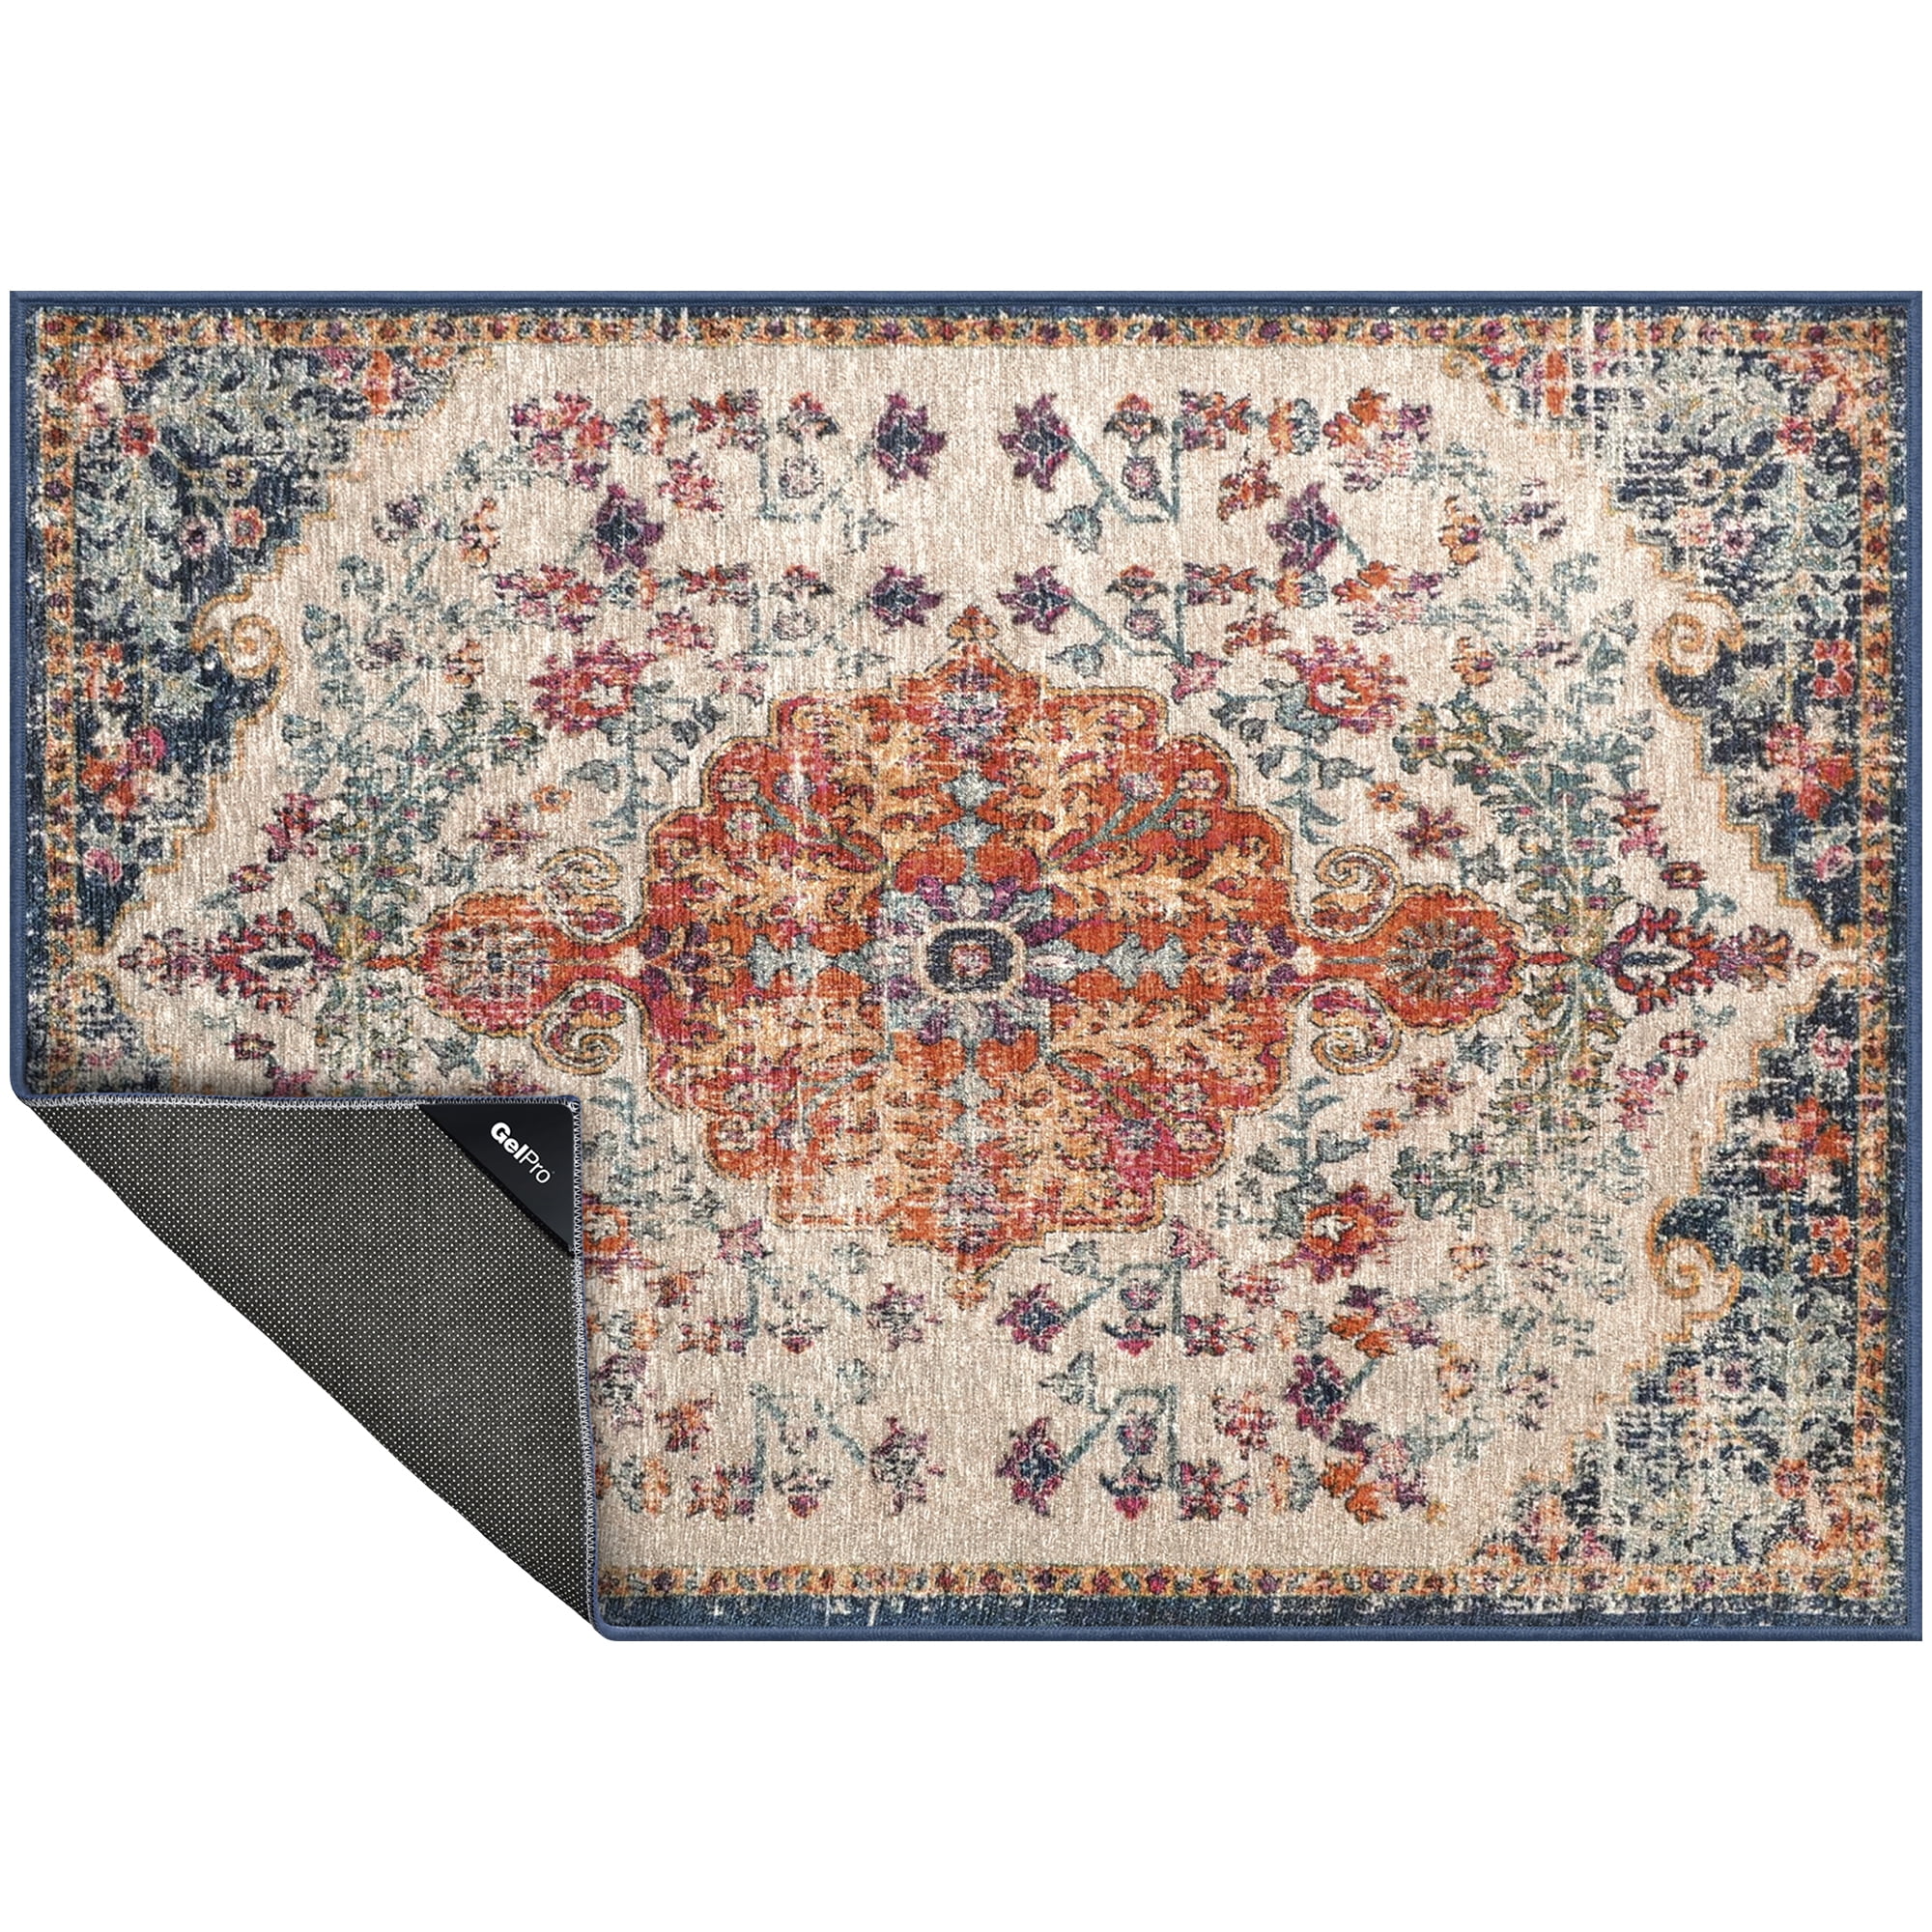 The Best Rug Grippers That You Can Buy on  – StyleCaster